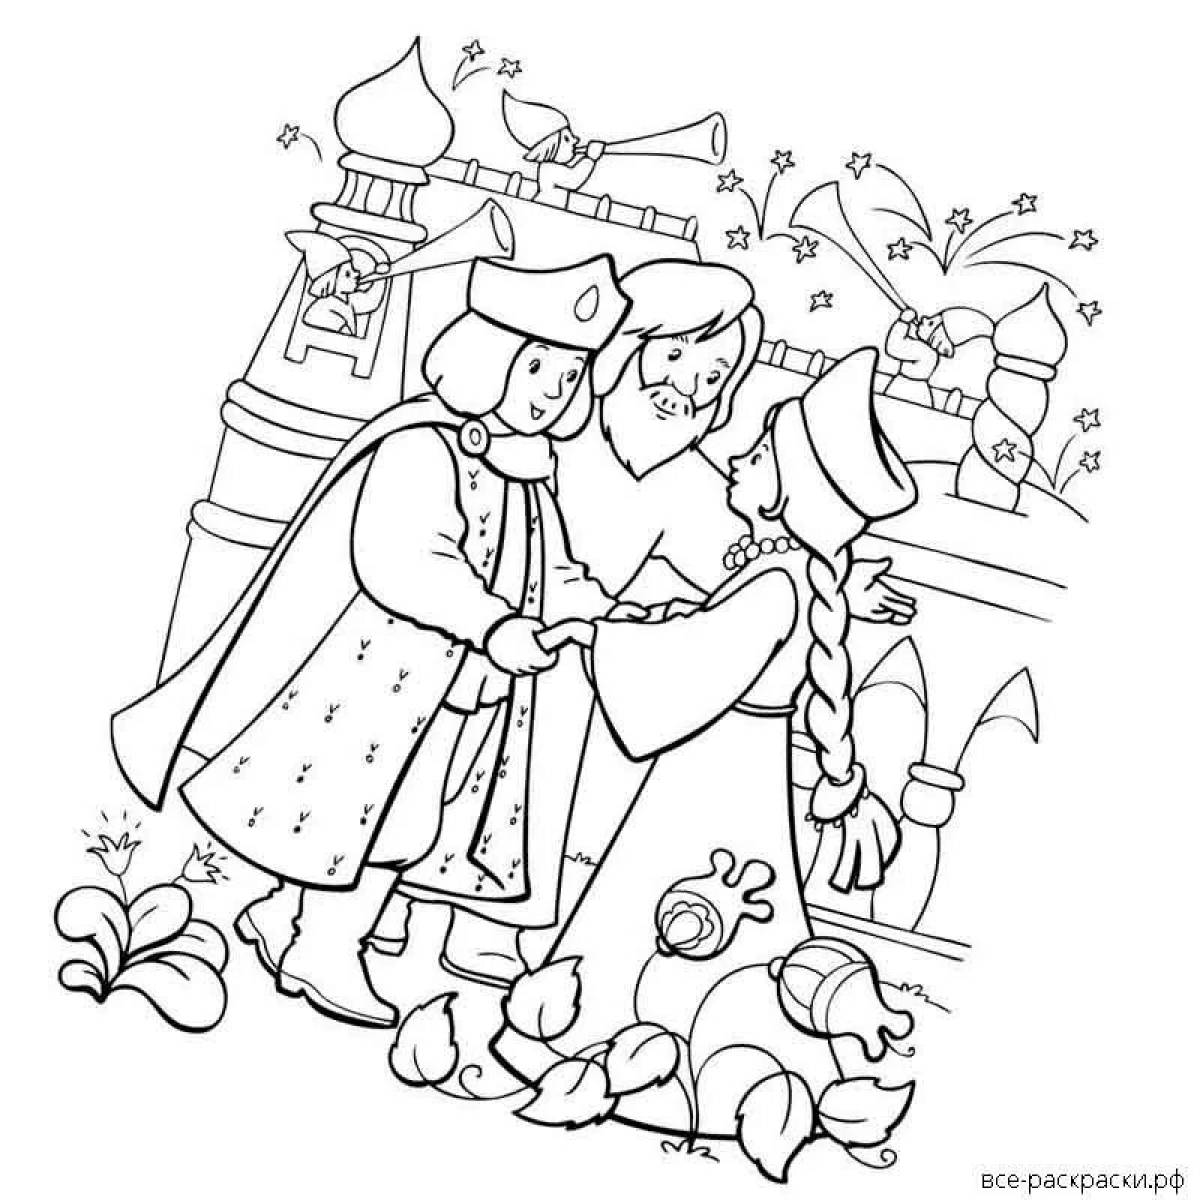 Coloring page charming scarlet flower